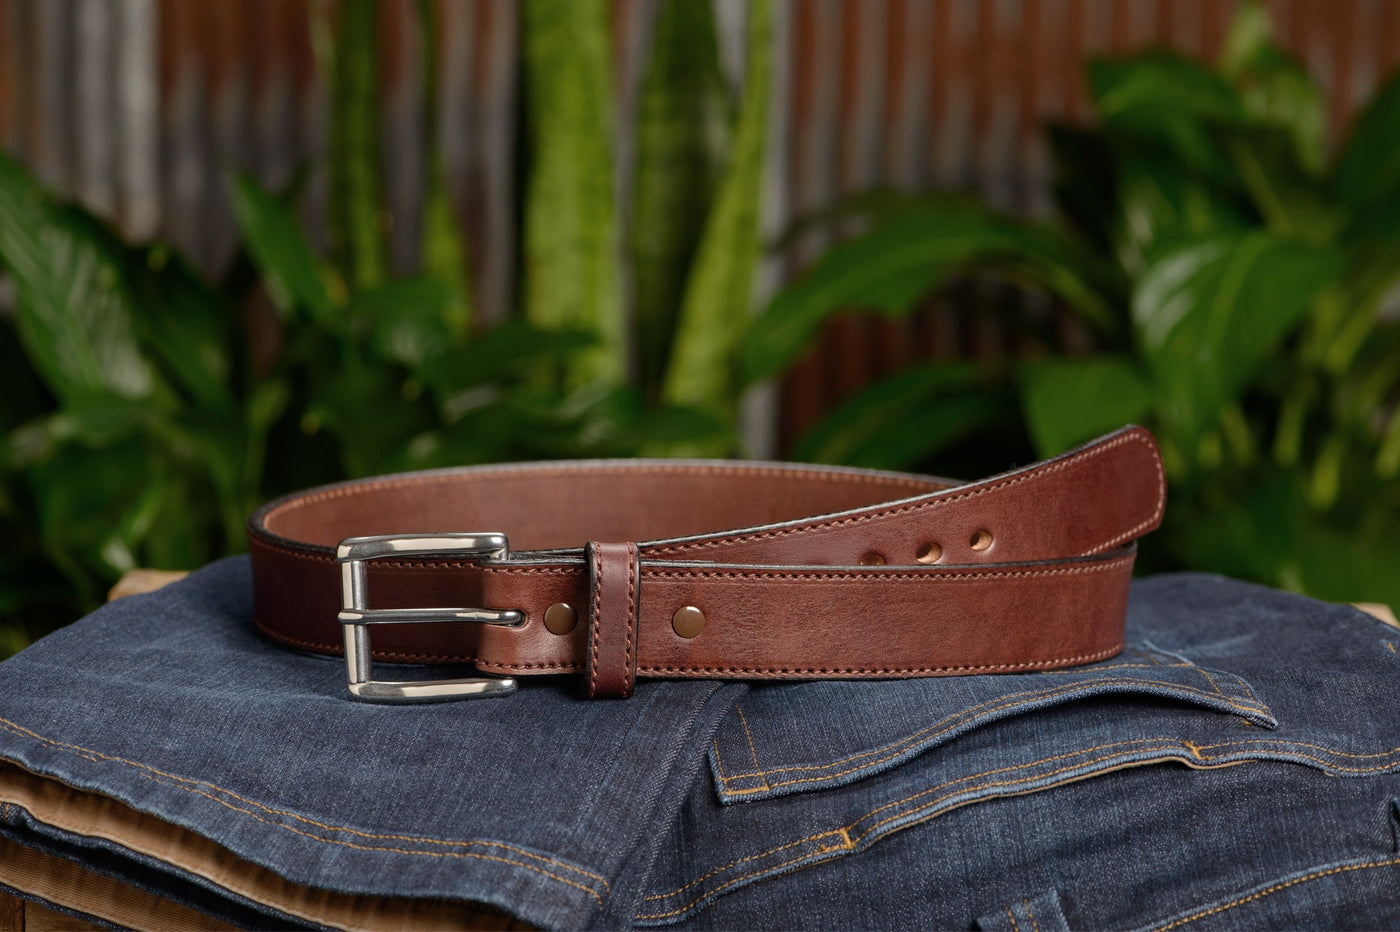 Classic Leather Belt in Natural, Made in the USA